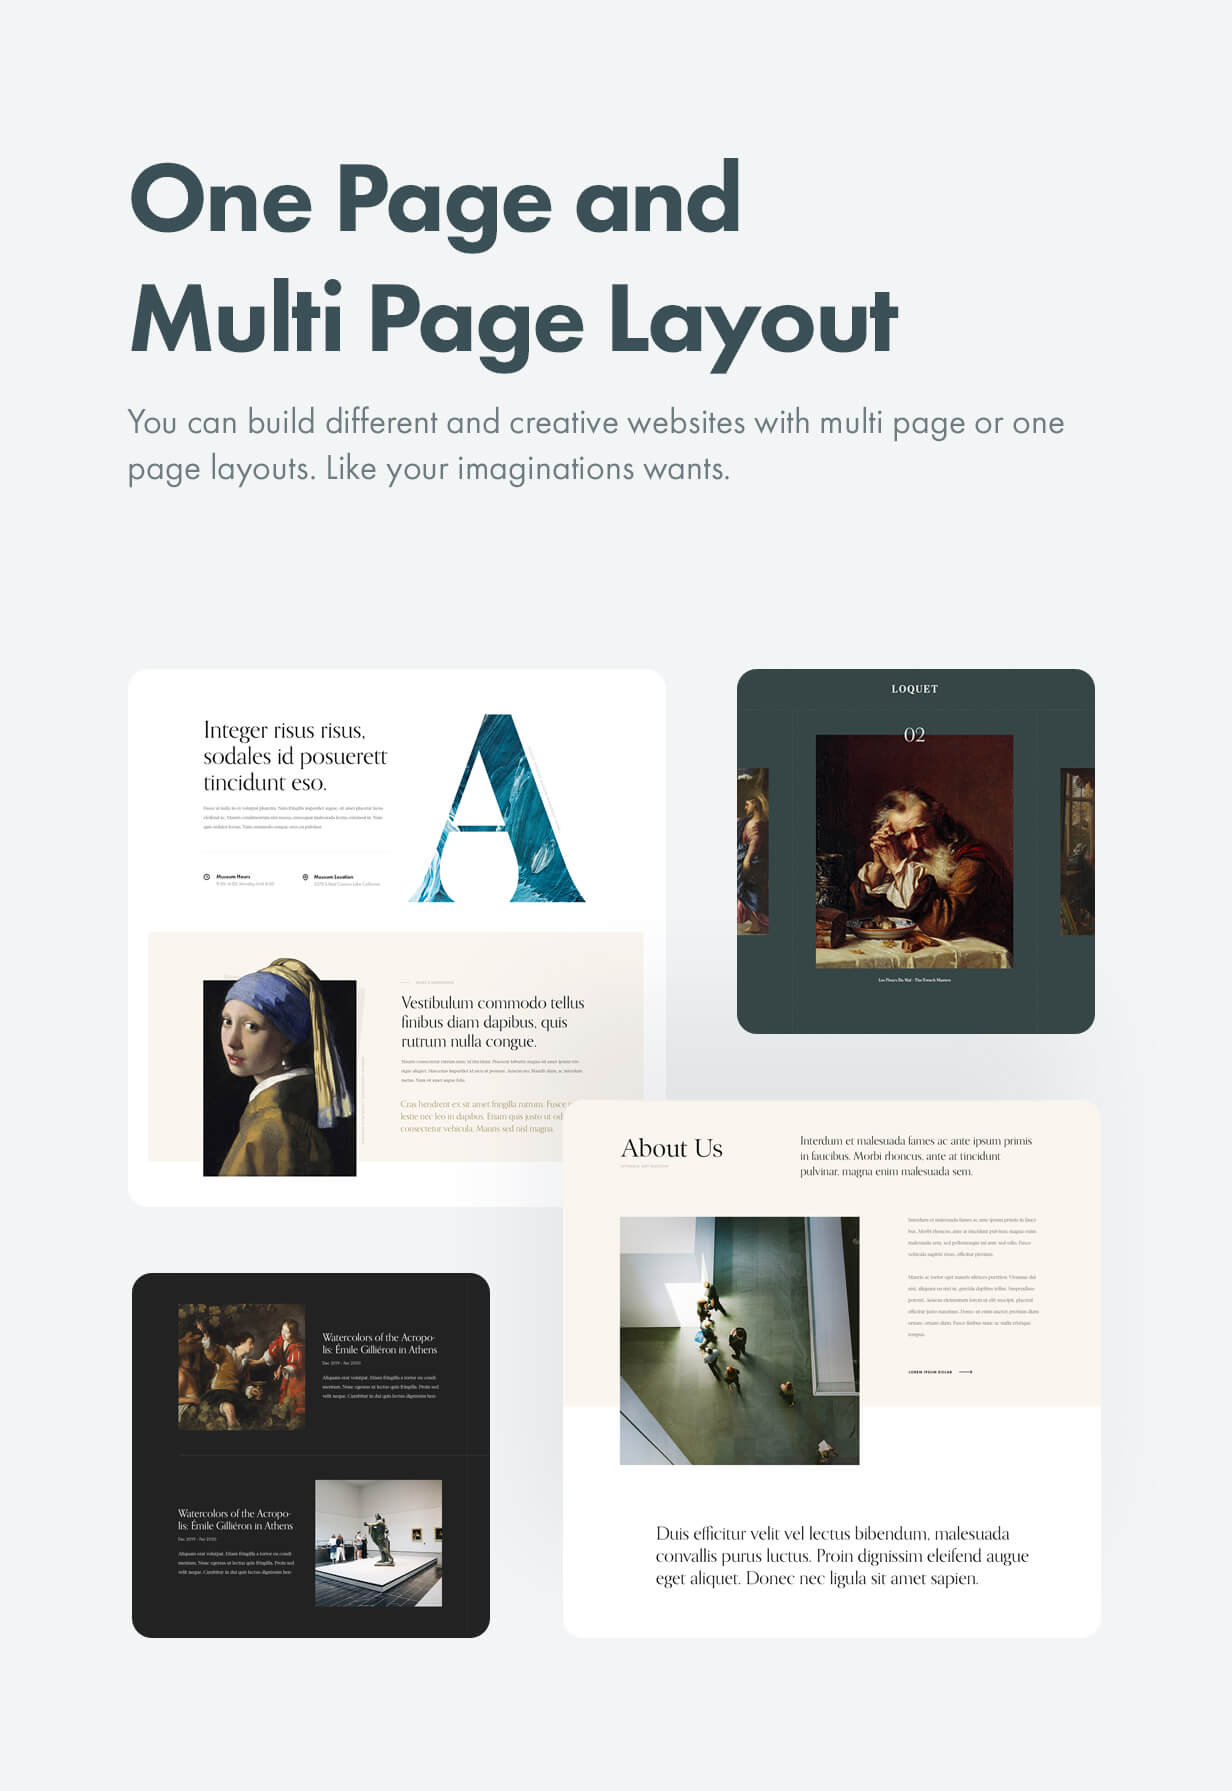 One page and multi page layout